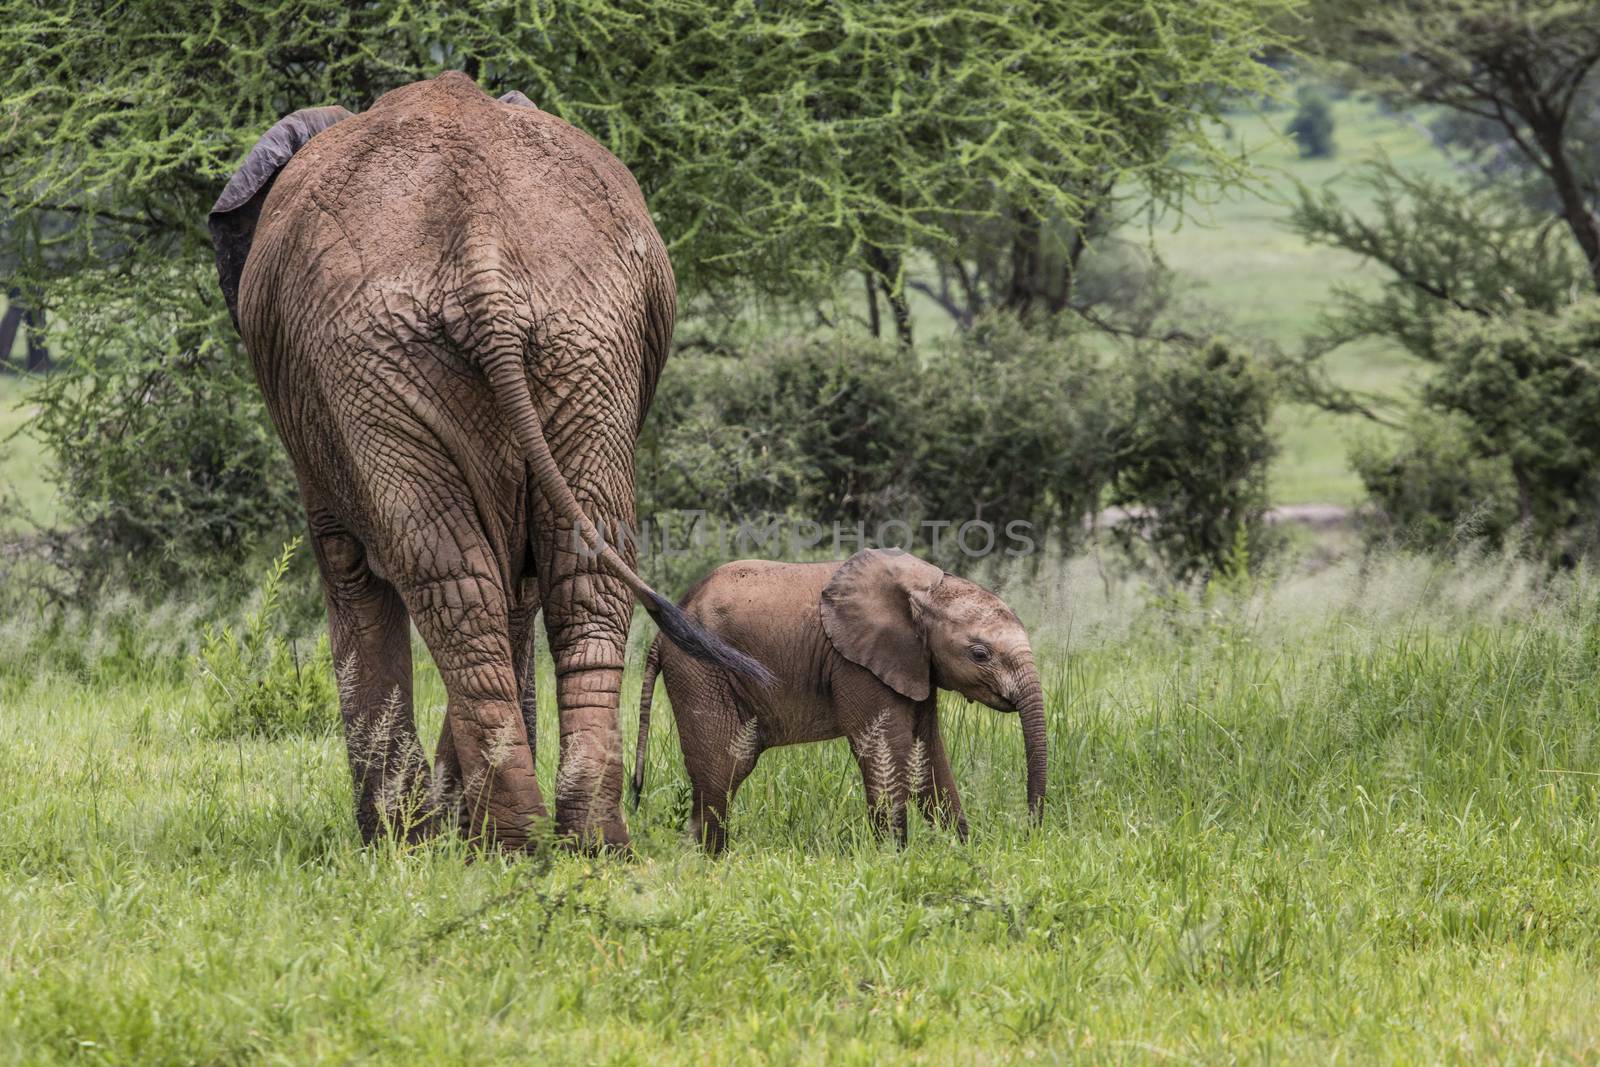 Mother and baby african elephants walking in savannah in the Tarangire National Park, Tanzania